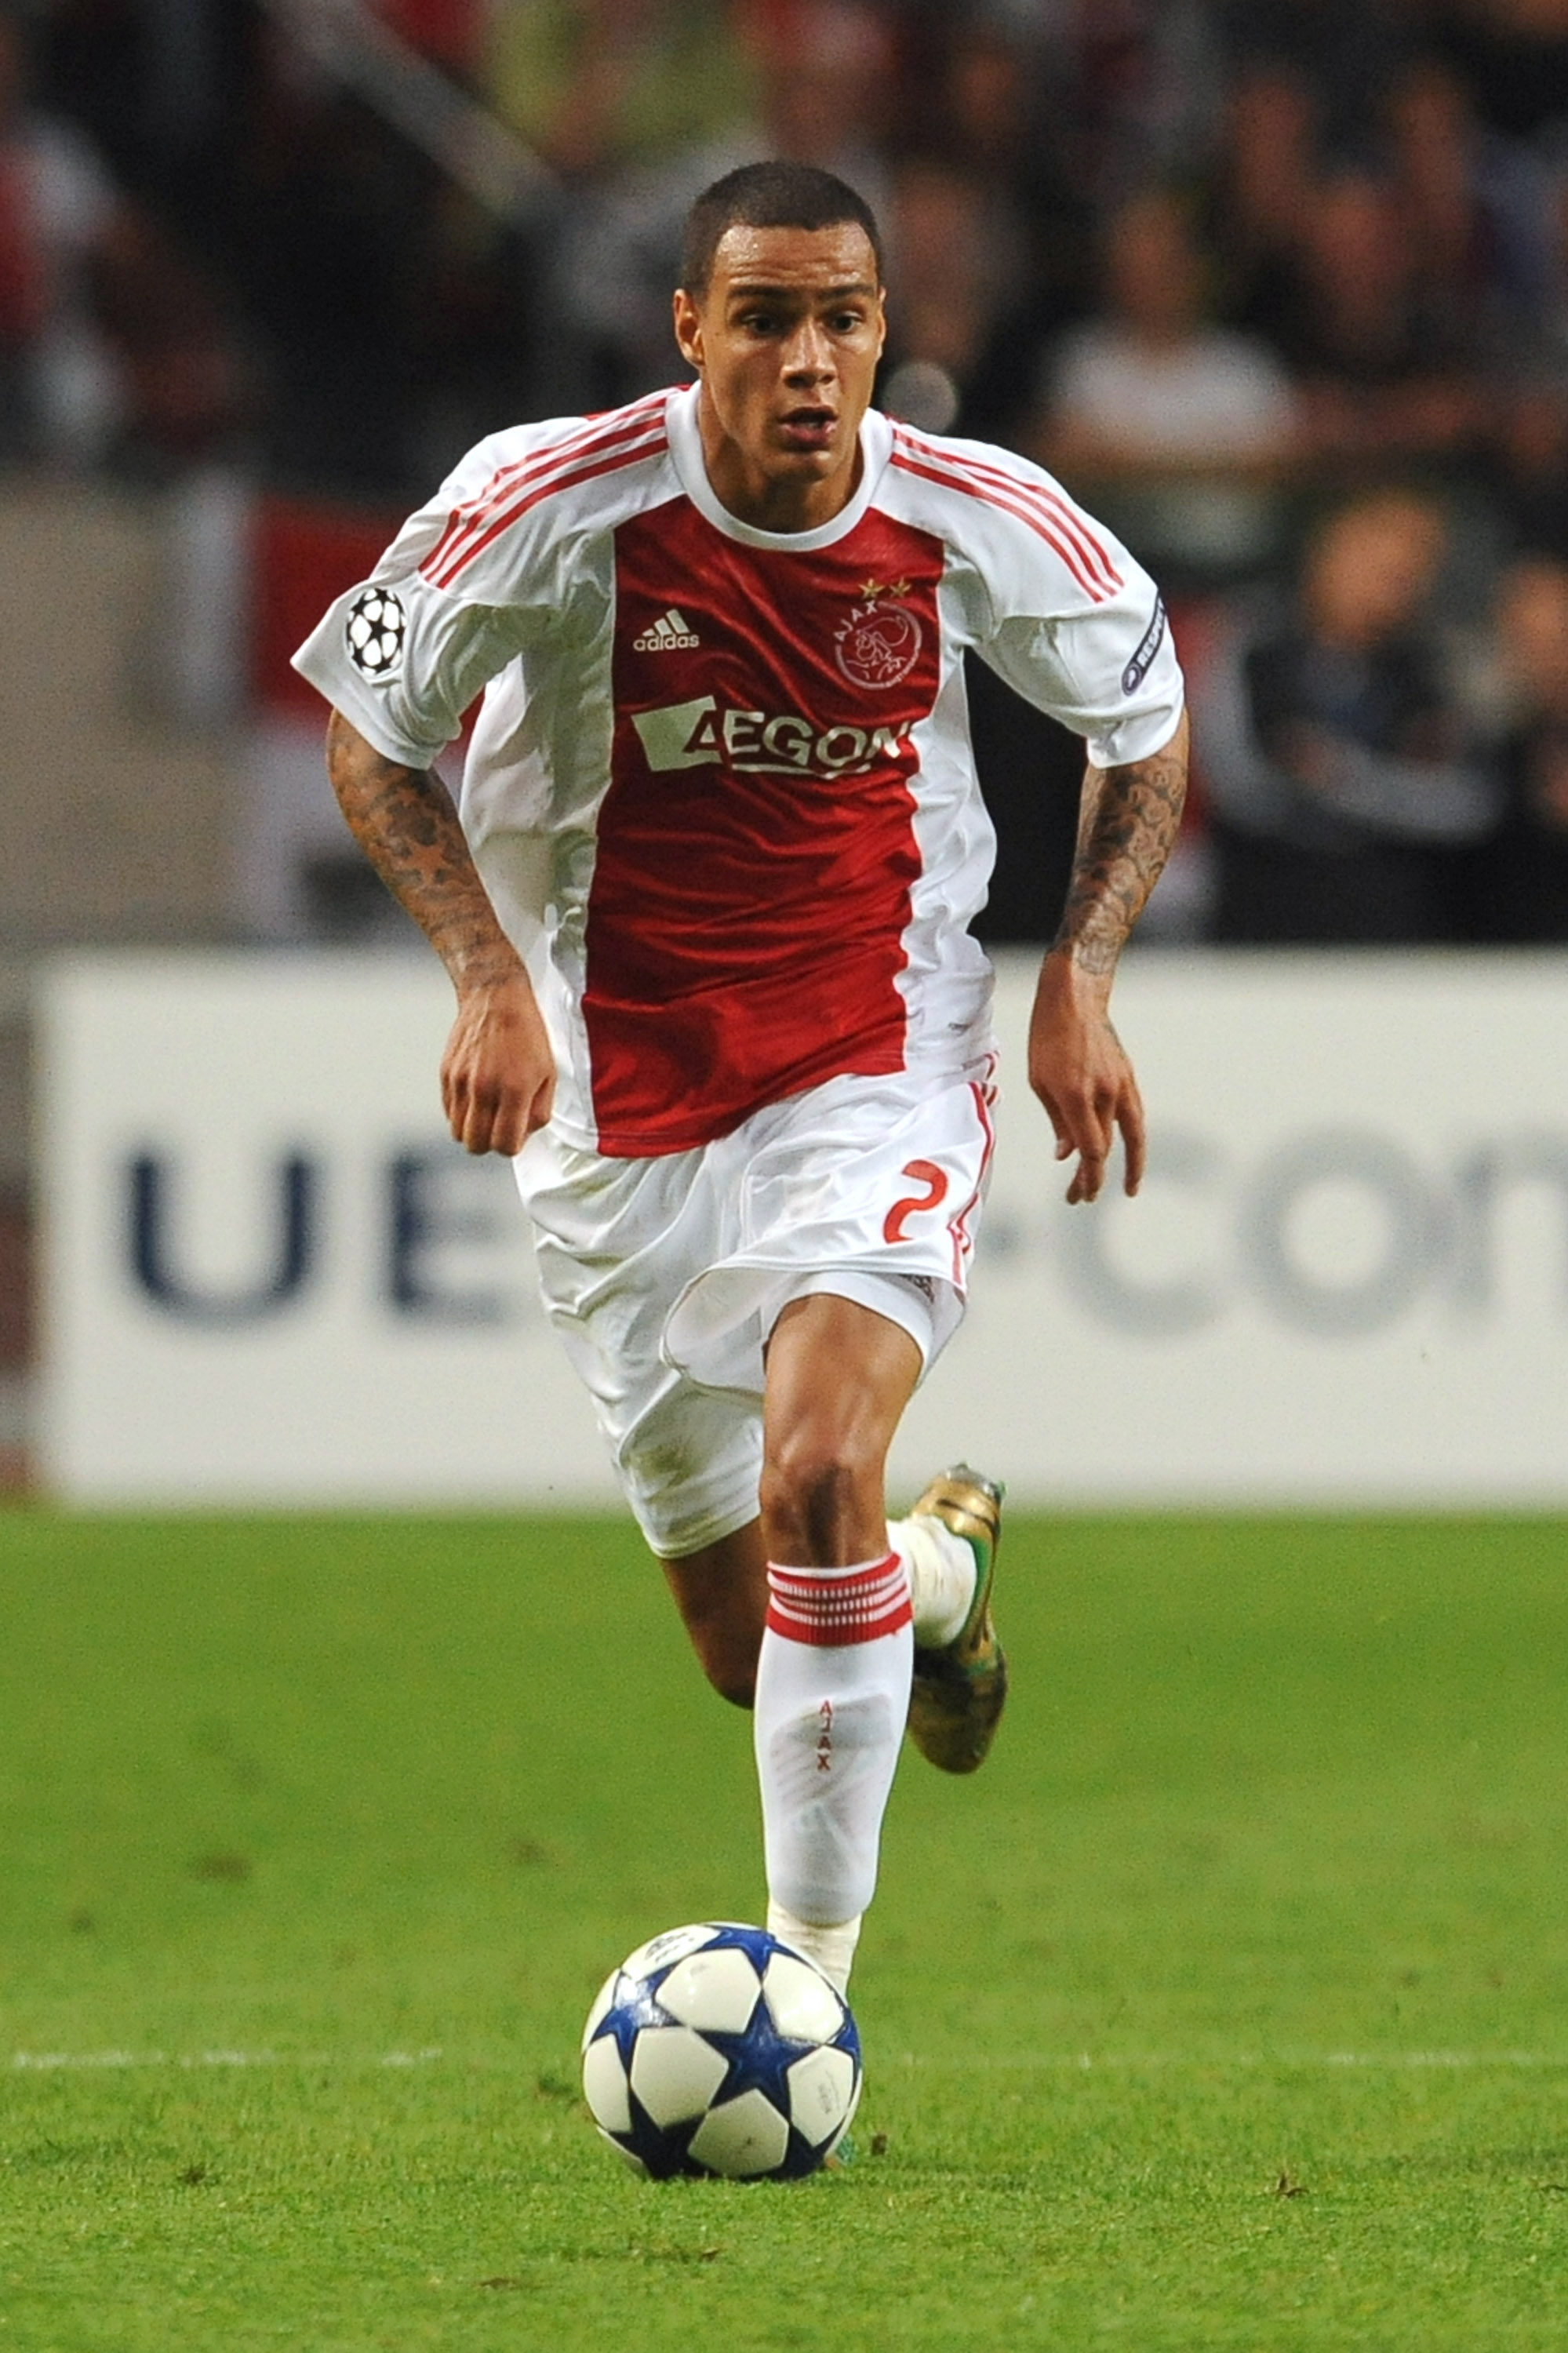 AMSTERDAM, NETHERLANDS - AUGUST 25:  Gregory Van Der Wiel of AFC Ajax in action during the Champions League Play-off match between AFC Ajax and FC Dynamo Kiev at Amsterdam Arena on August 25, 2010 in Amsterdam, Netherlands.  (Photo by Valerio Pennicino/Ge